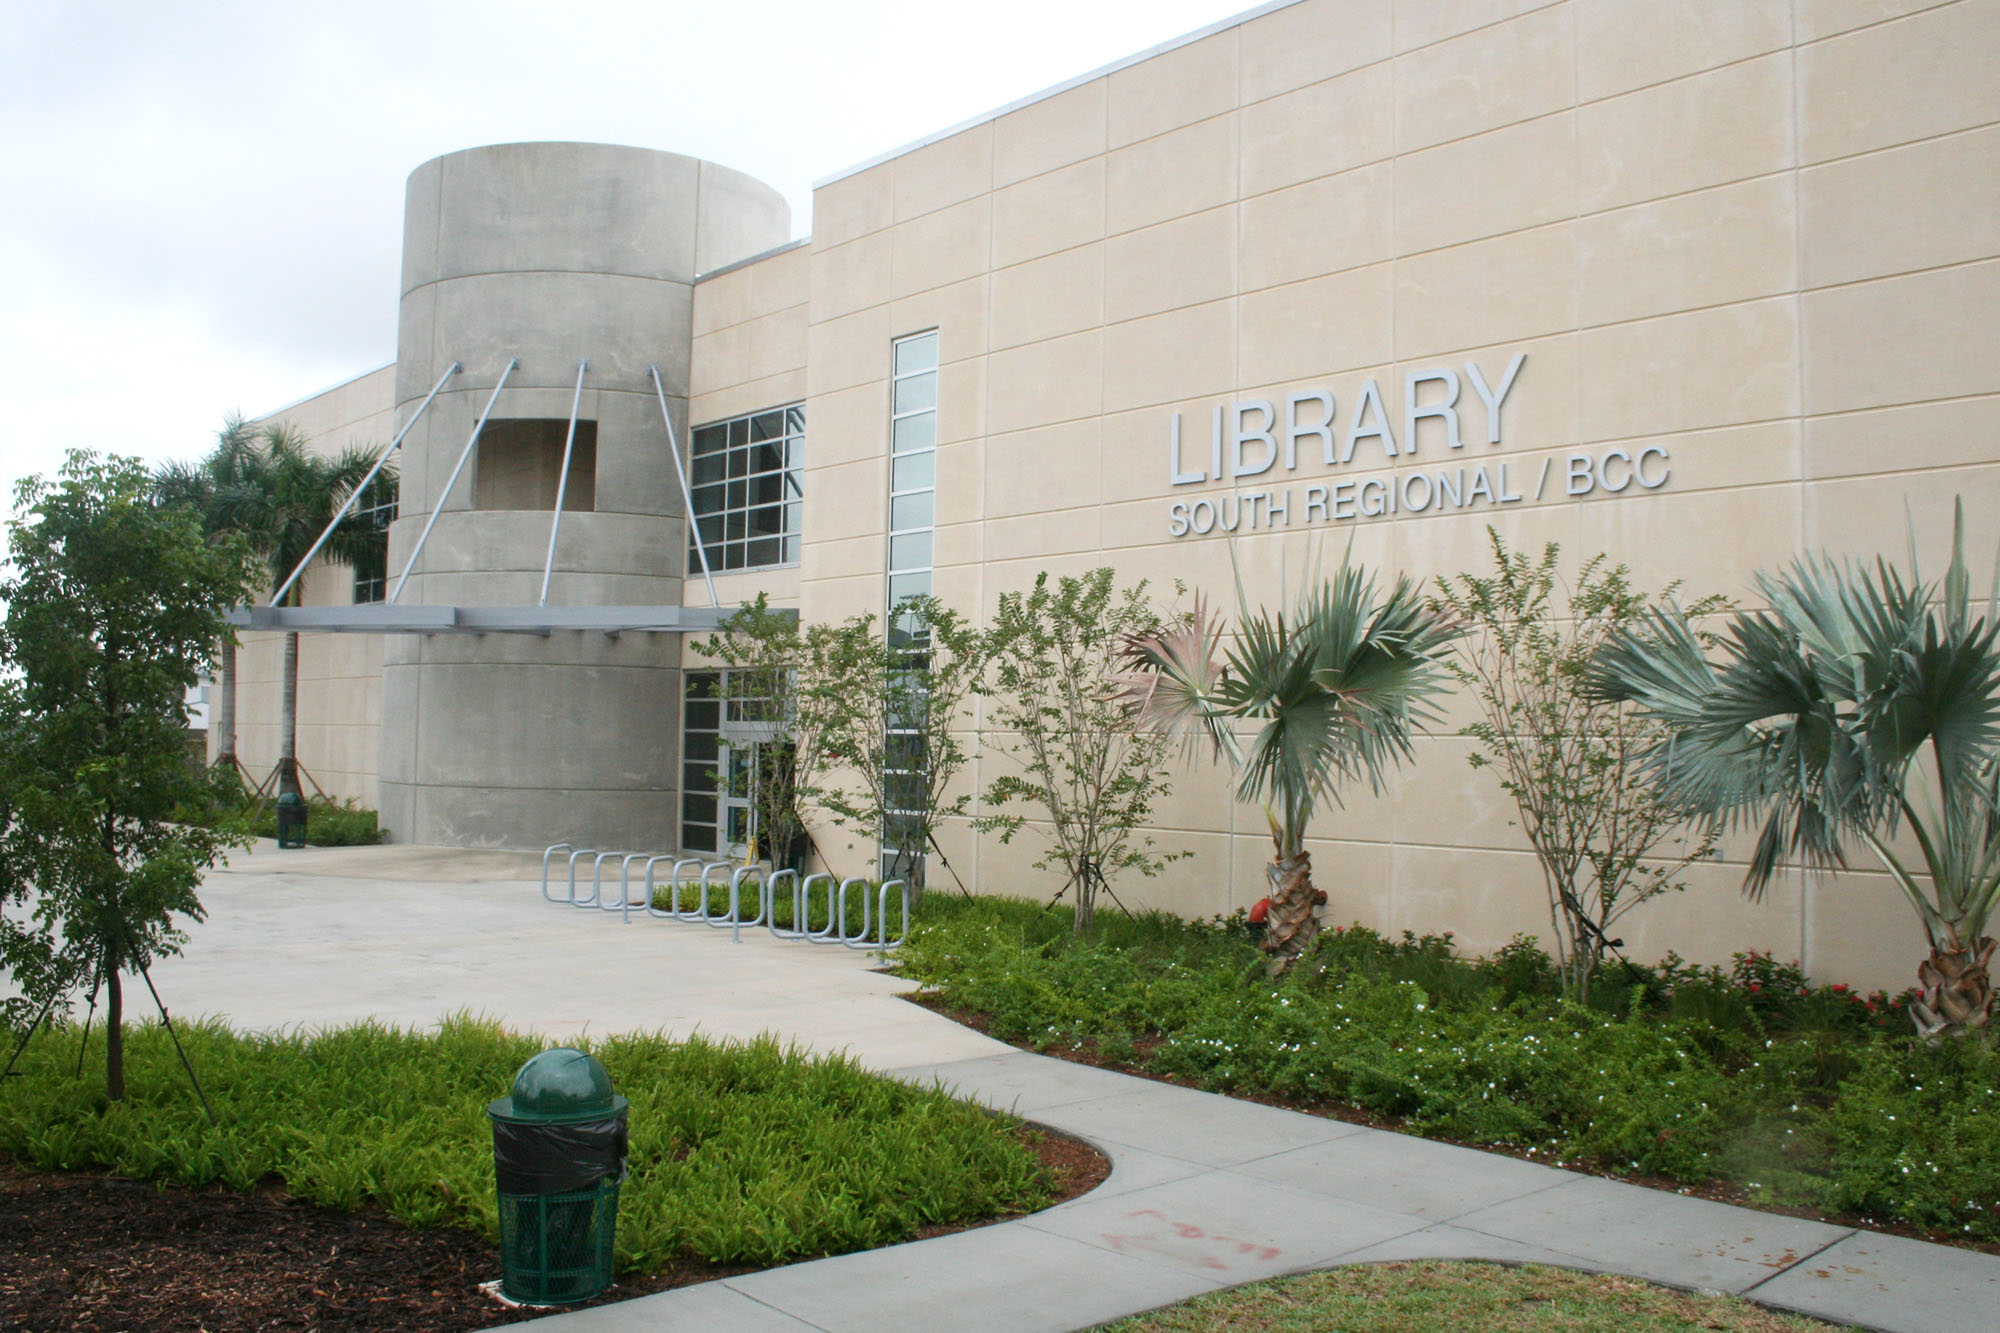 South Regional/Broward College Library in Pembroke Pines, opened in 1983, celebrates 40 years of service to the community